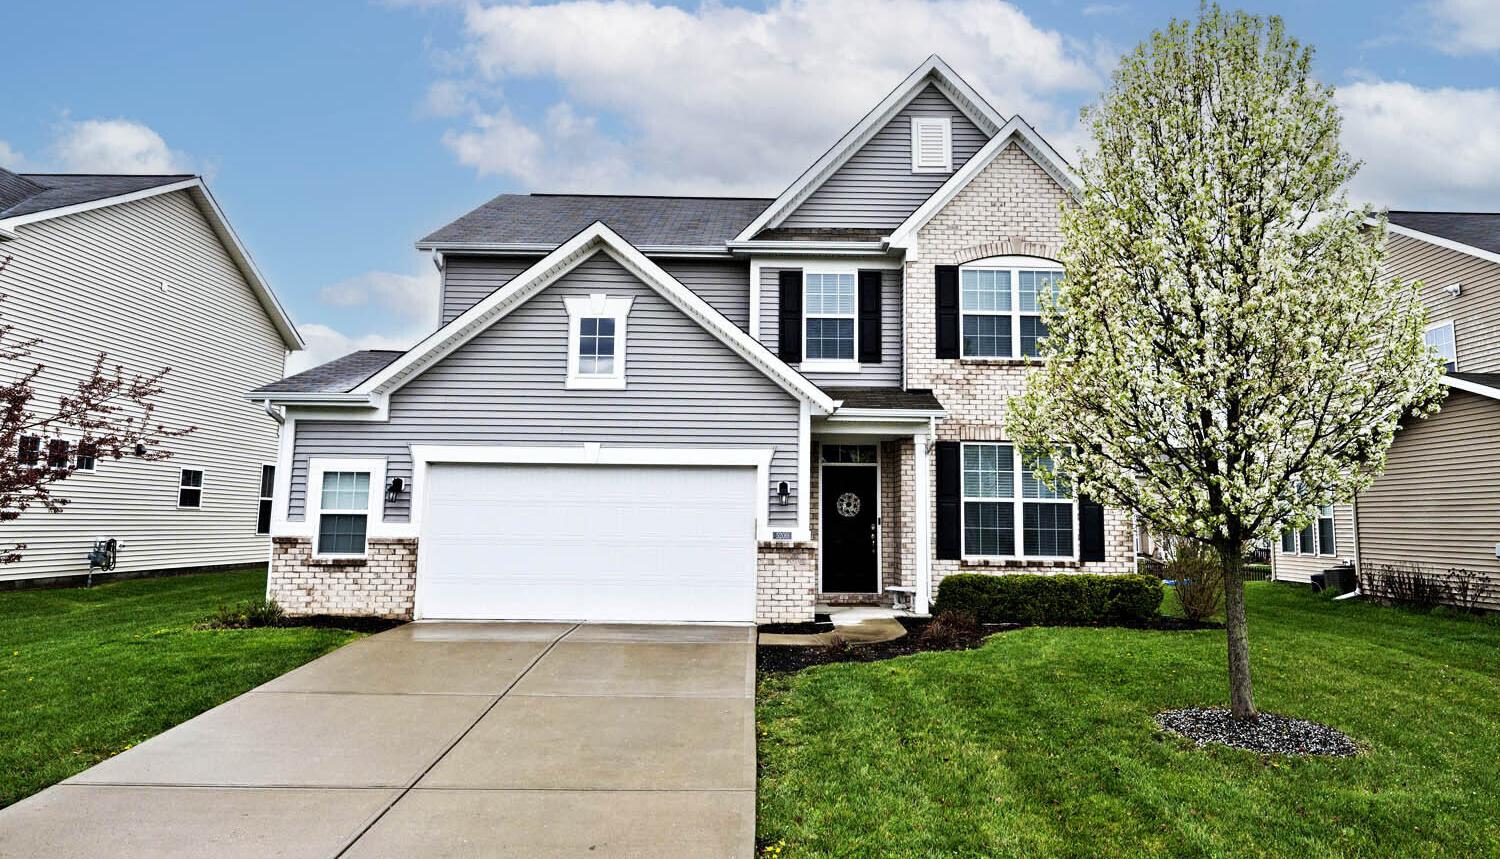 Photo one of 5200 Charmaine Ln Plainfield IN 46168 | MLS 21971420